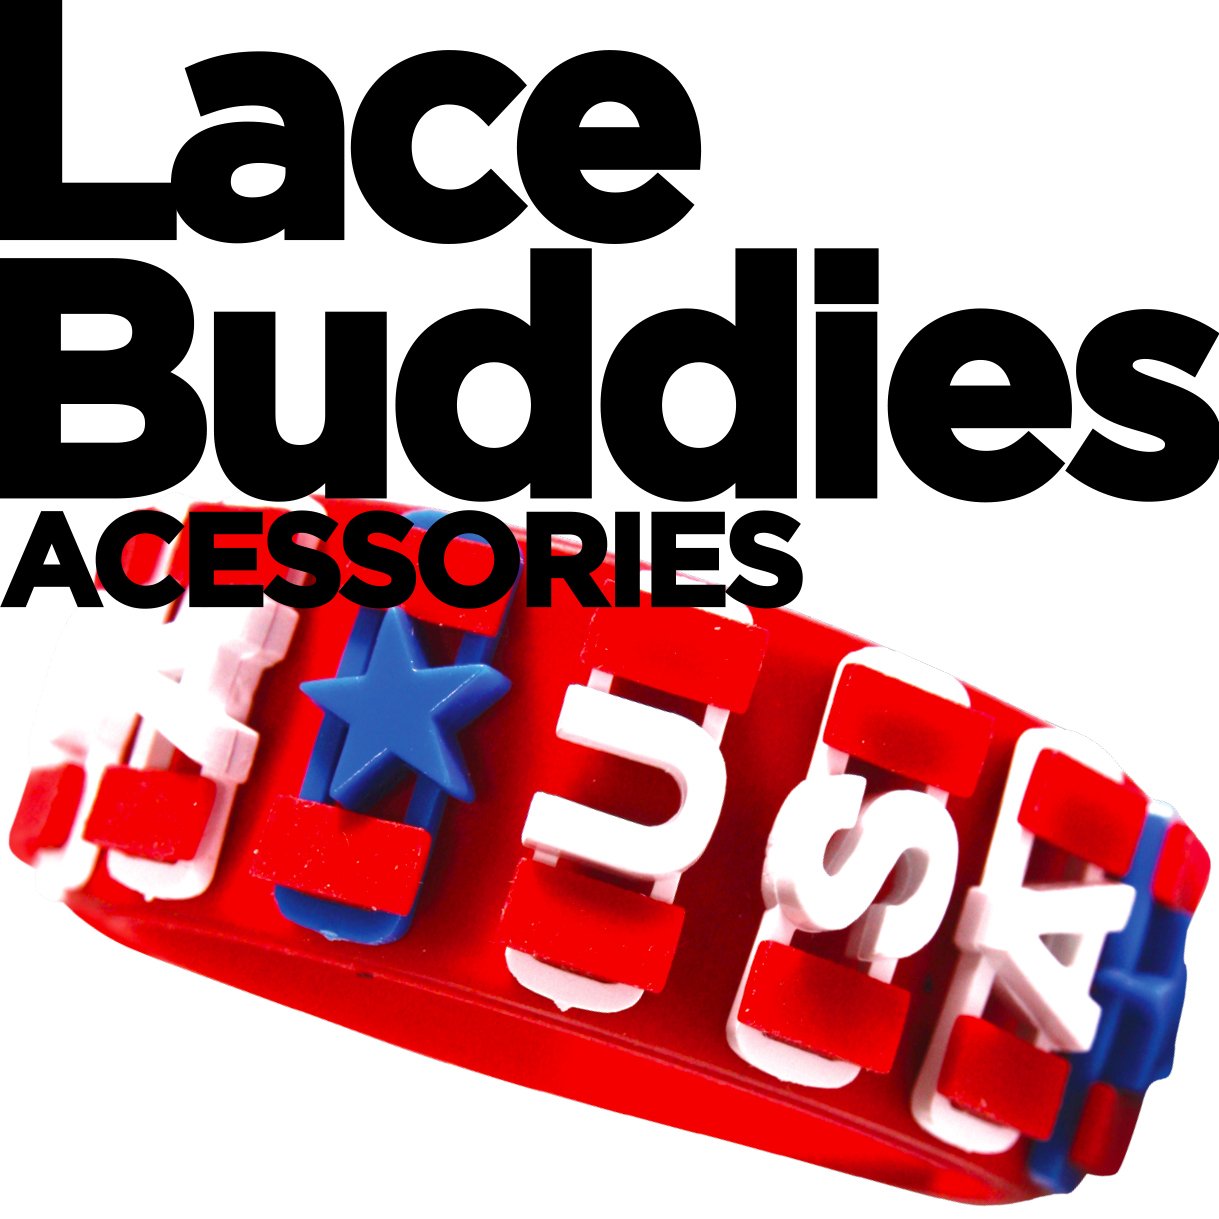 Lace Buddies Accessories